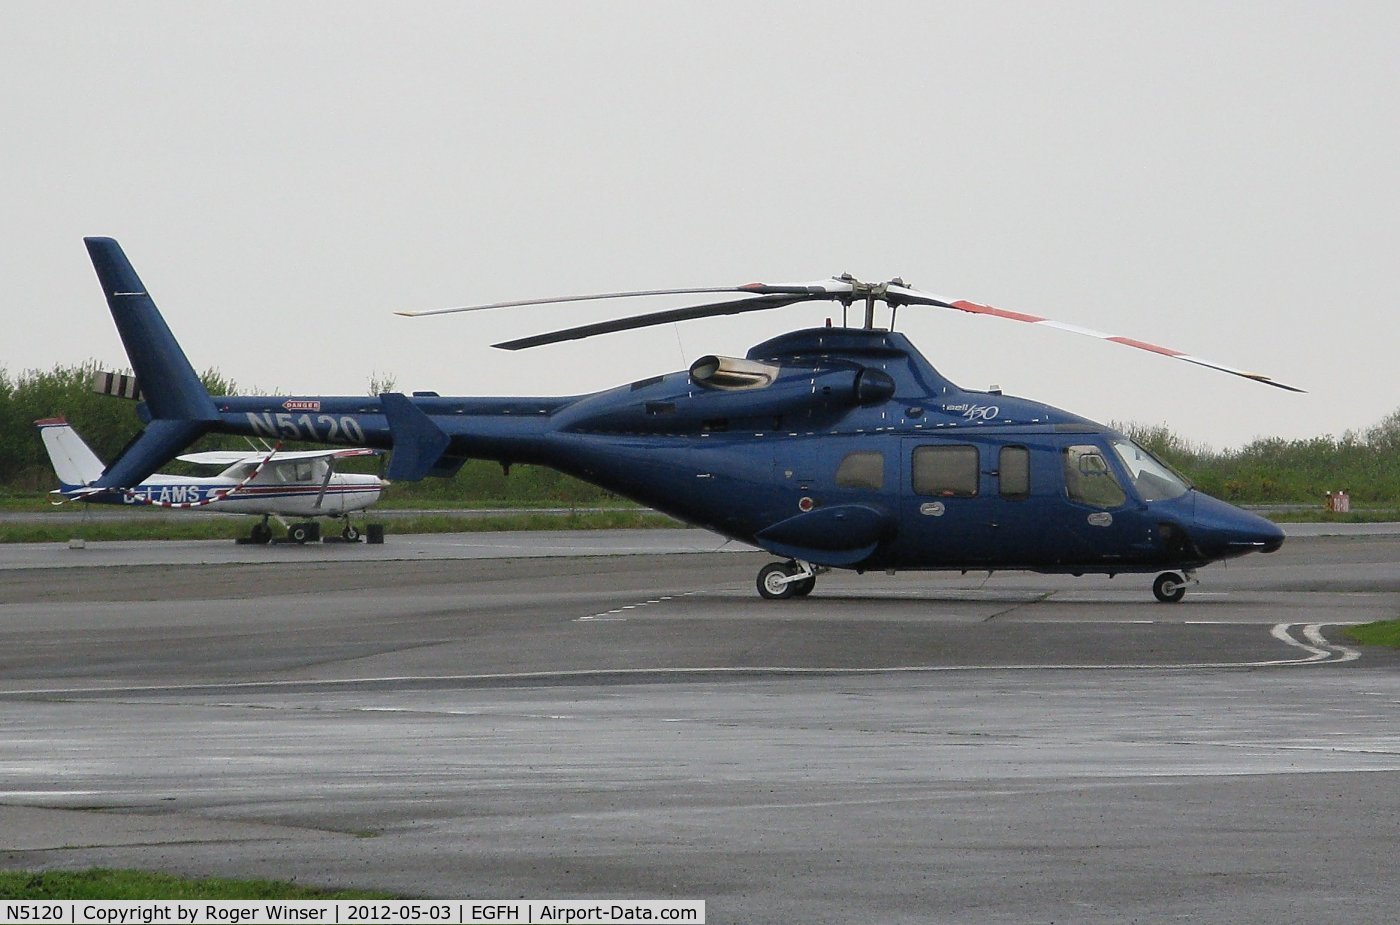 N5120, 2002 Bell 430 C/N 49095, Visiting Bell 430 helicopter. Subsequently registeted M-DWSF.